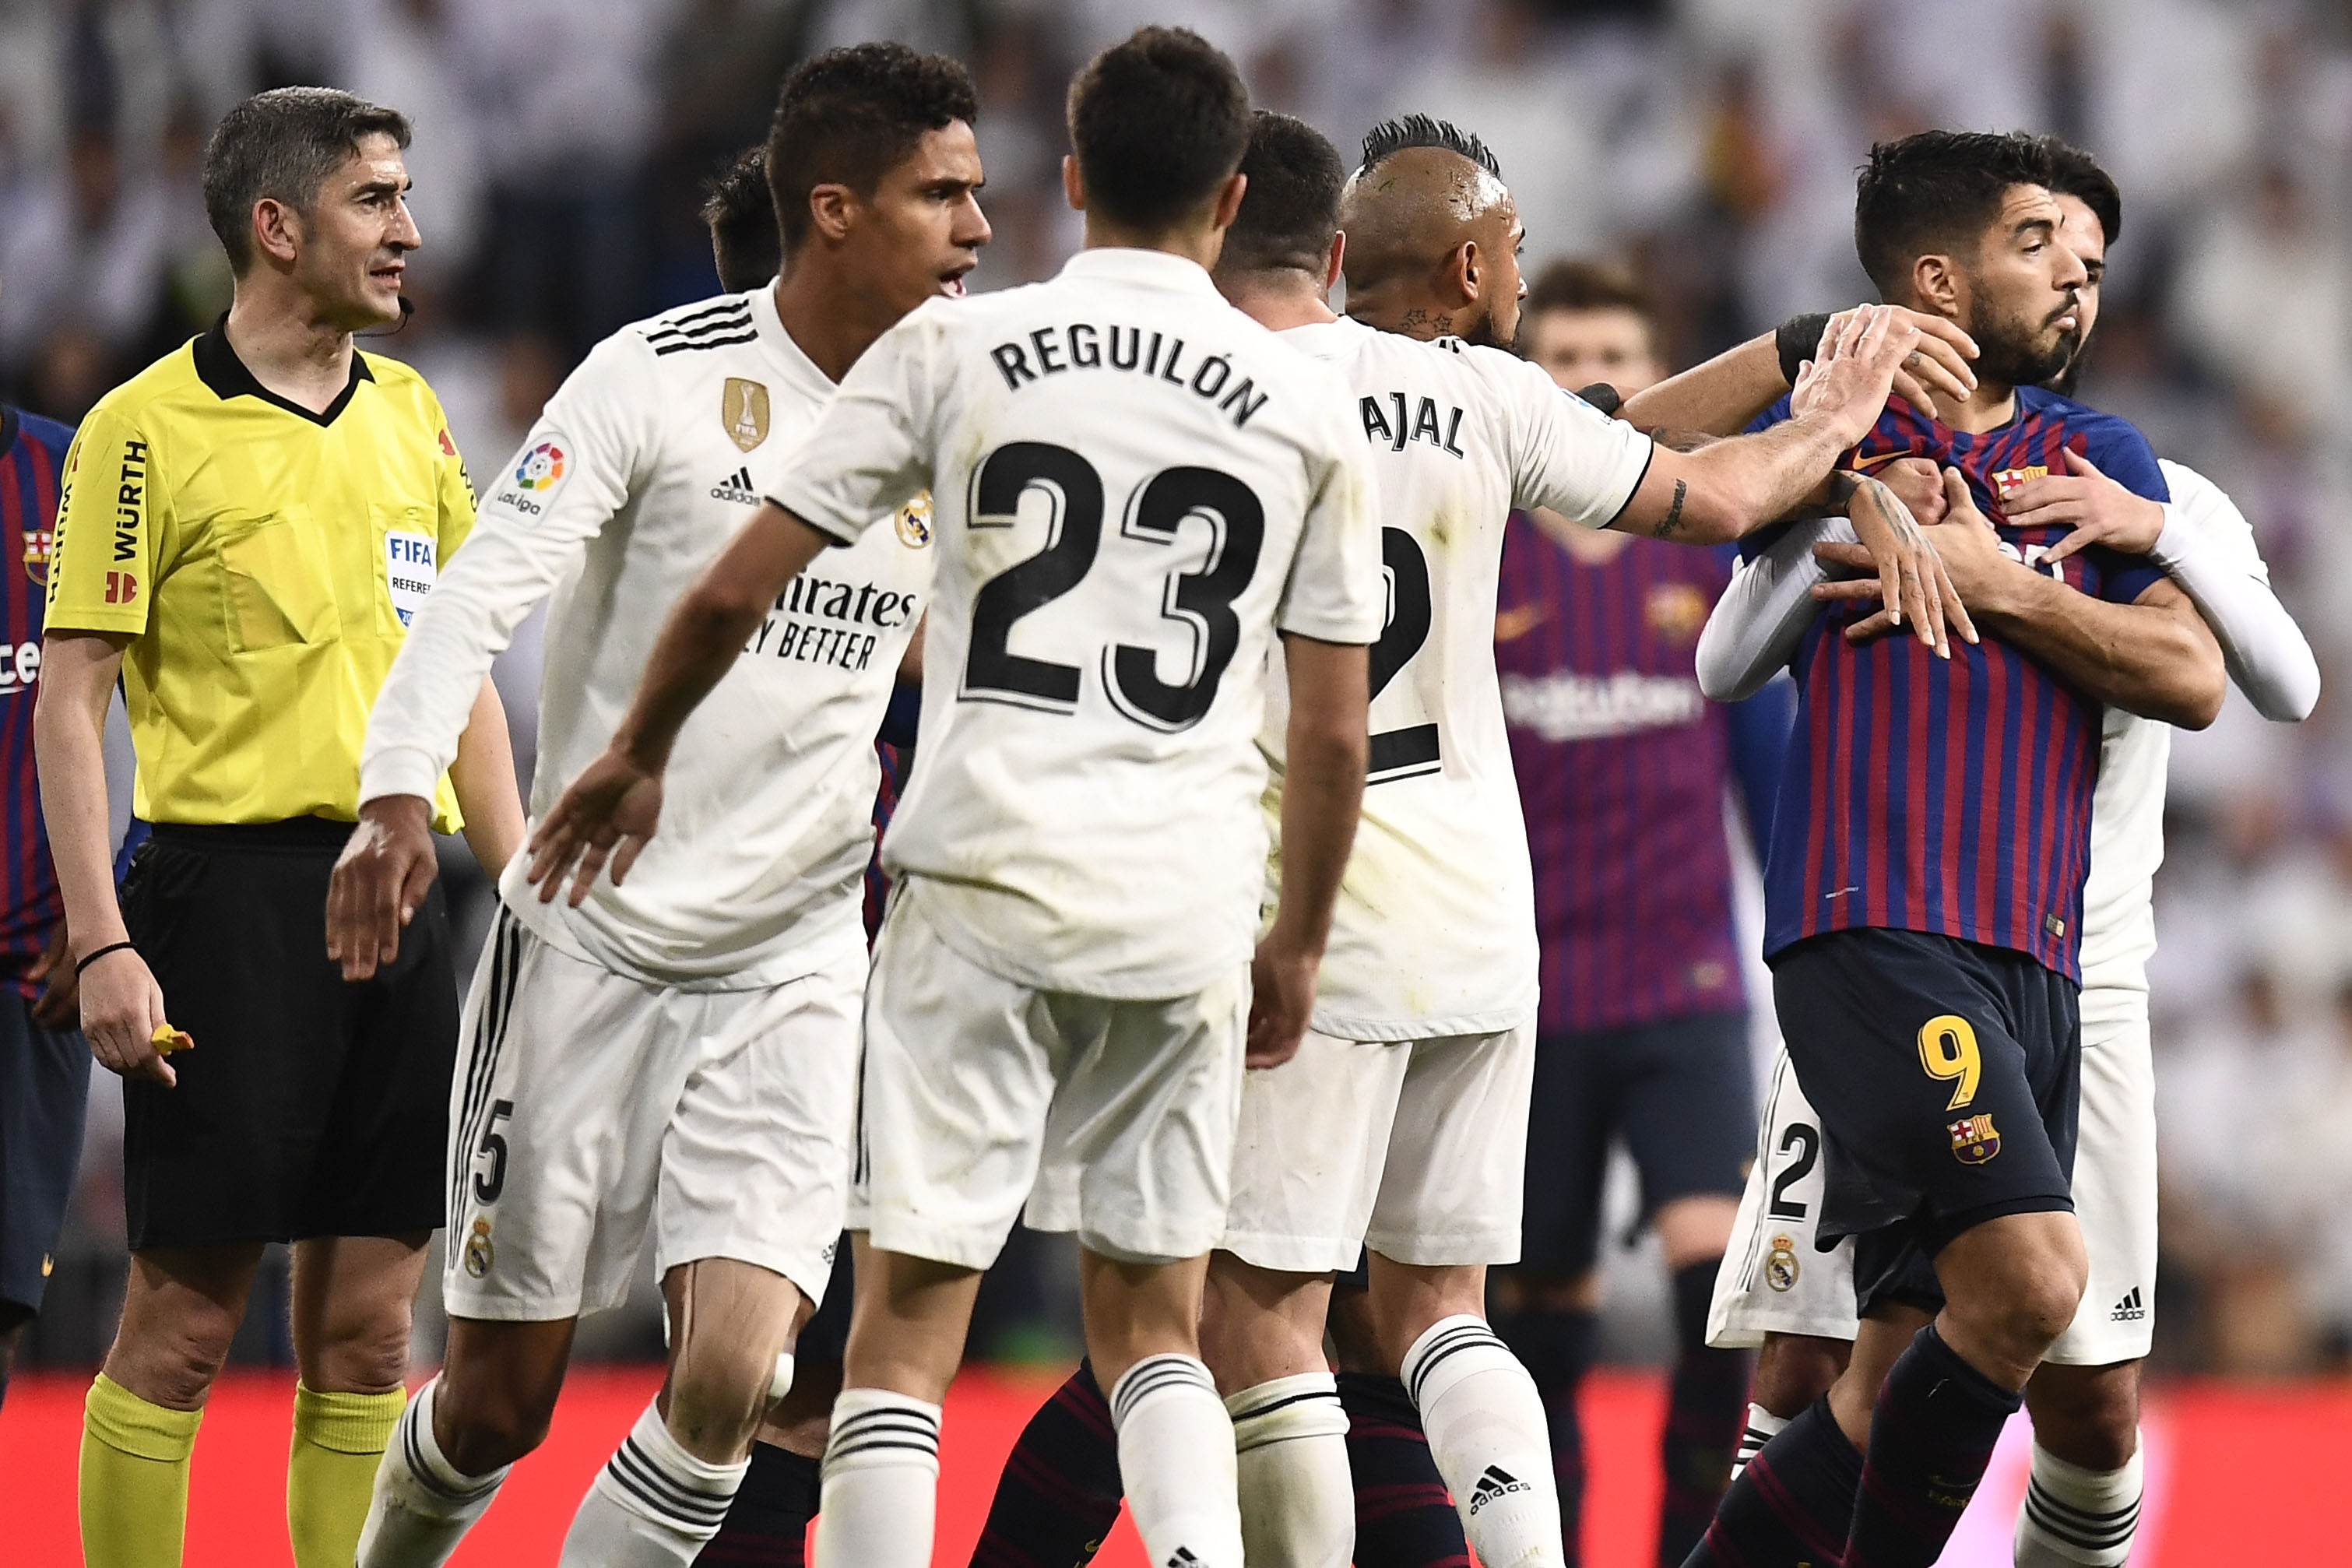 Barcelona's Uruguayan forward Luis Suarez (2R) is hold by Real Madrid's Spanish midfielder Isco (R) during the Spanish league football match between Real Madrid CF and FC Barcelona at the Santiago Bernabeu stadium in Madrid on March 2, 2019. (Photo by OSCAR DEL POZO / AFP)        (Photo credit should read OSCAR DEL POZO/AFP/Getty Images)